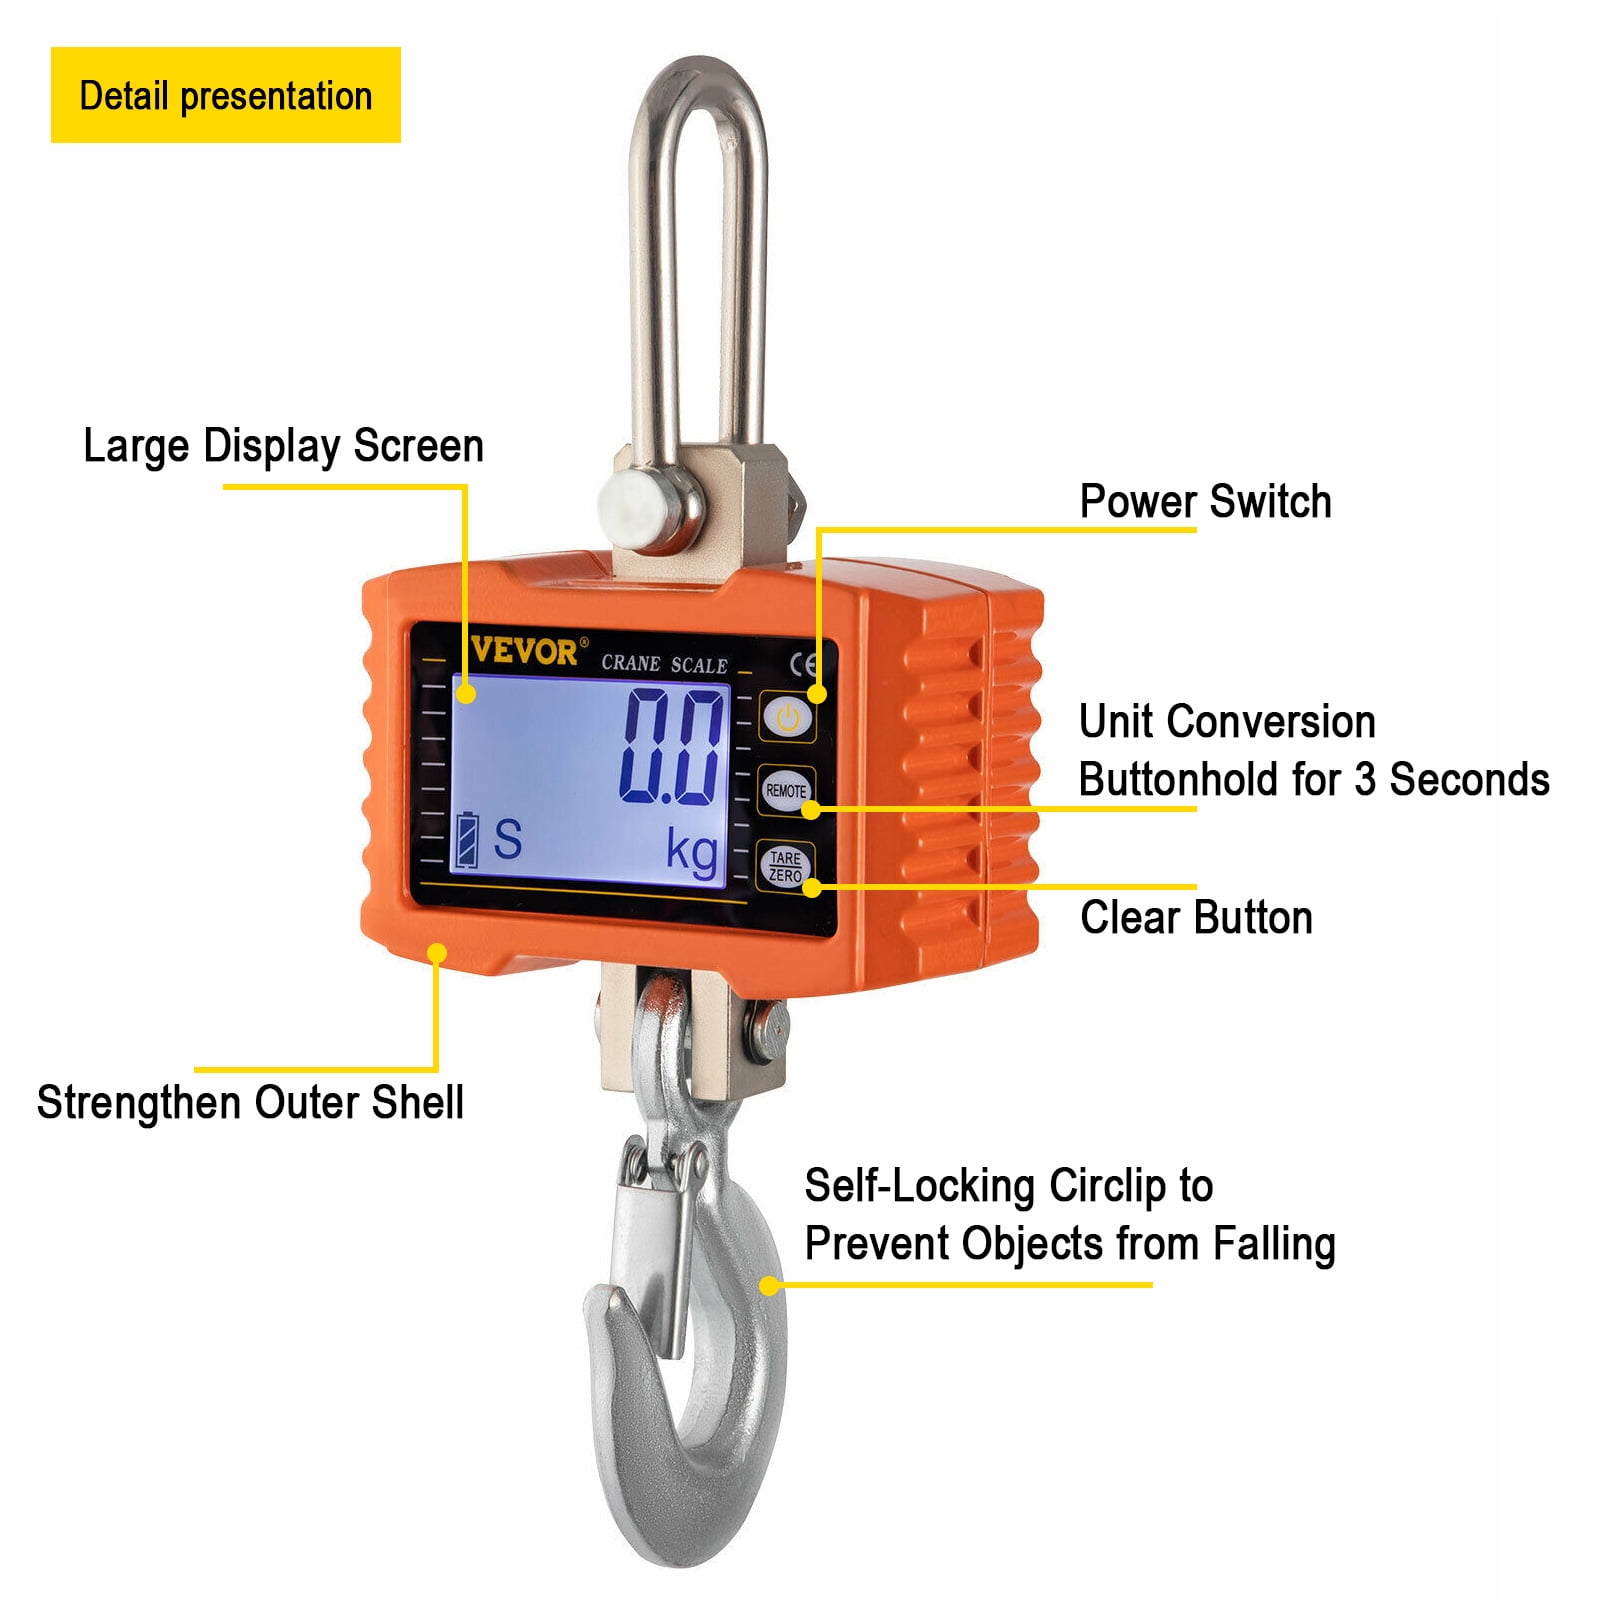 VEVOR Digital Crane Scale 1000KG 2000LBS Orange Digital Industrial Heavy  Duty Crane Scale with Accurate Reloading Spring Sensor for Hunting, Farm or  Construction 